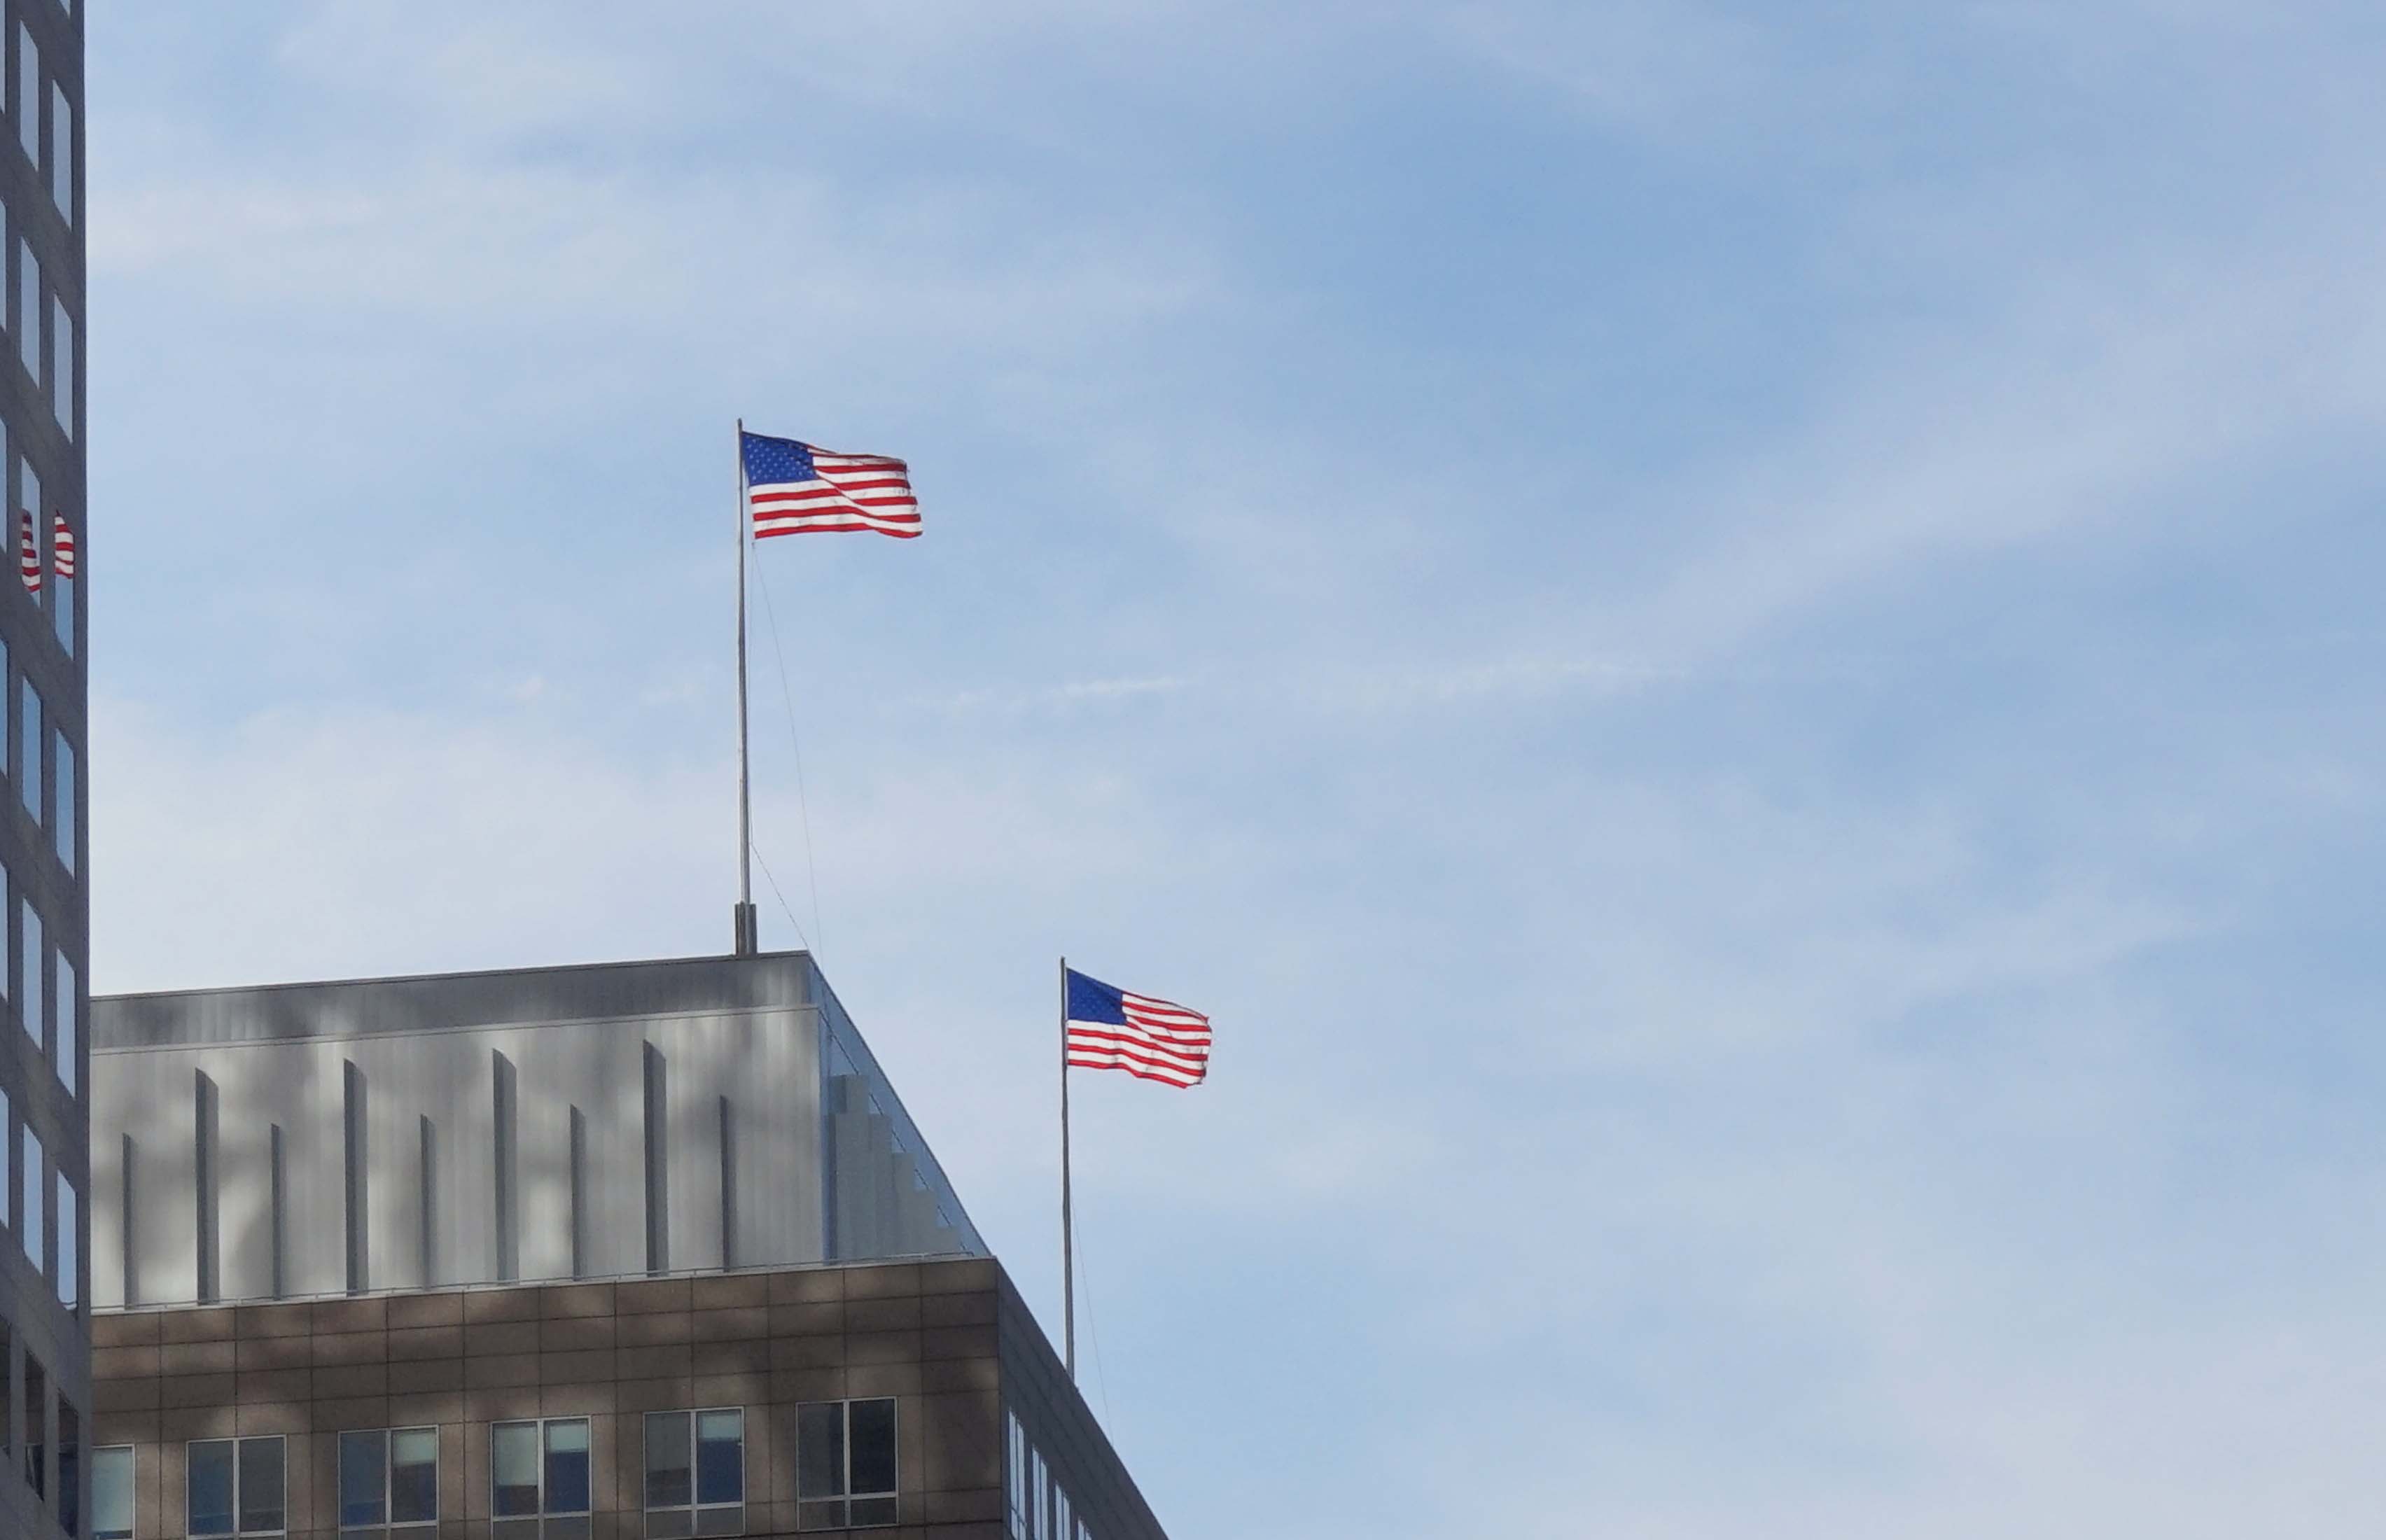 Dual American flags over NYMEX